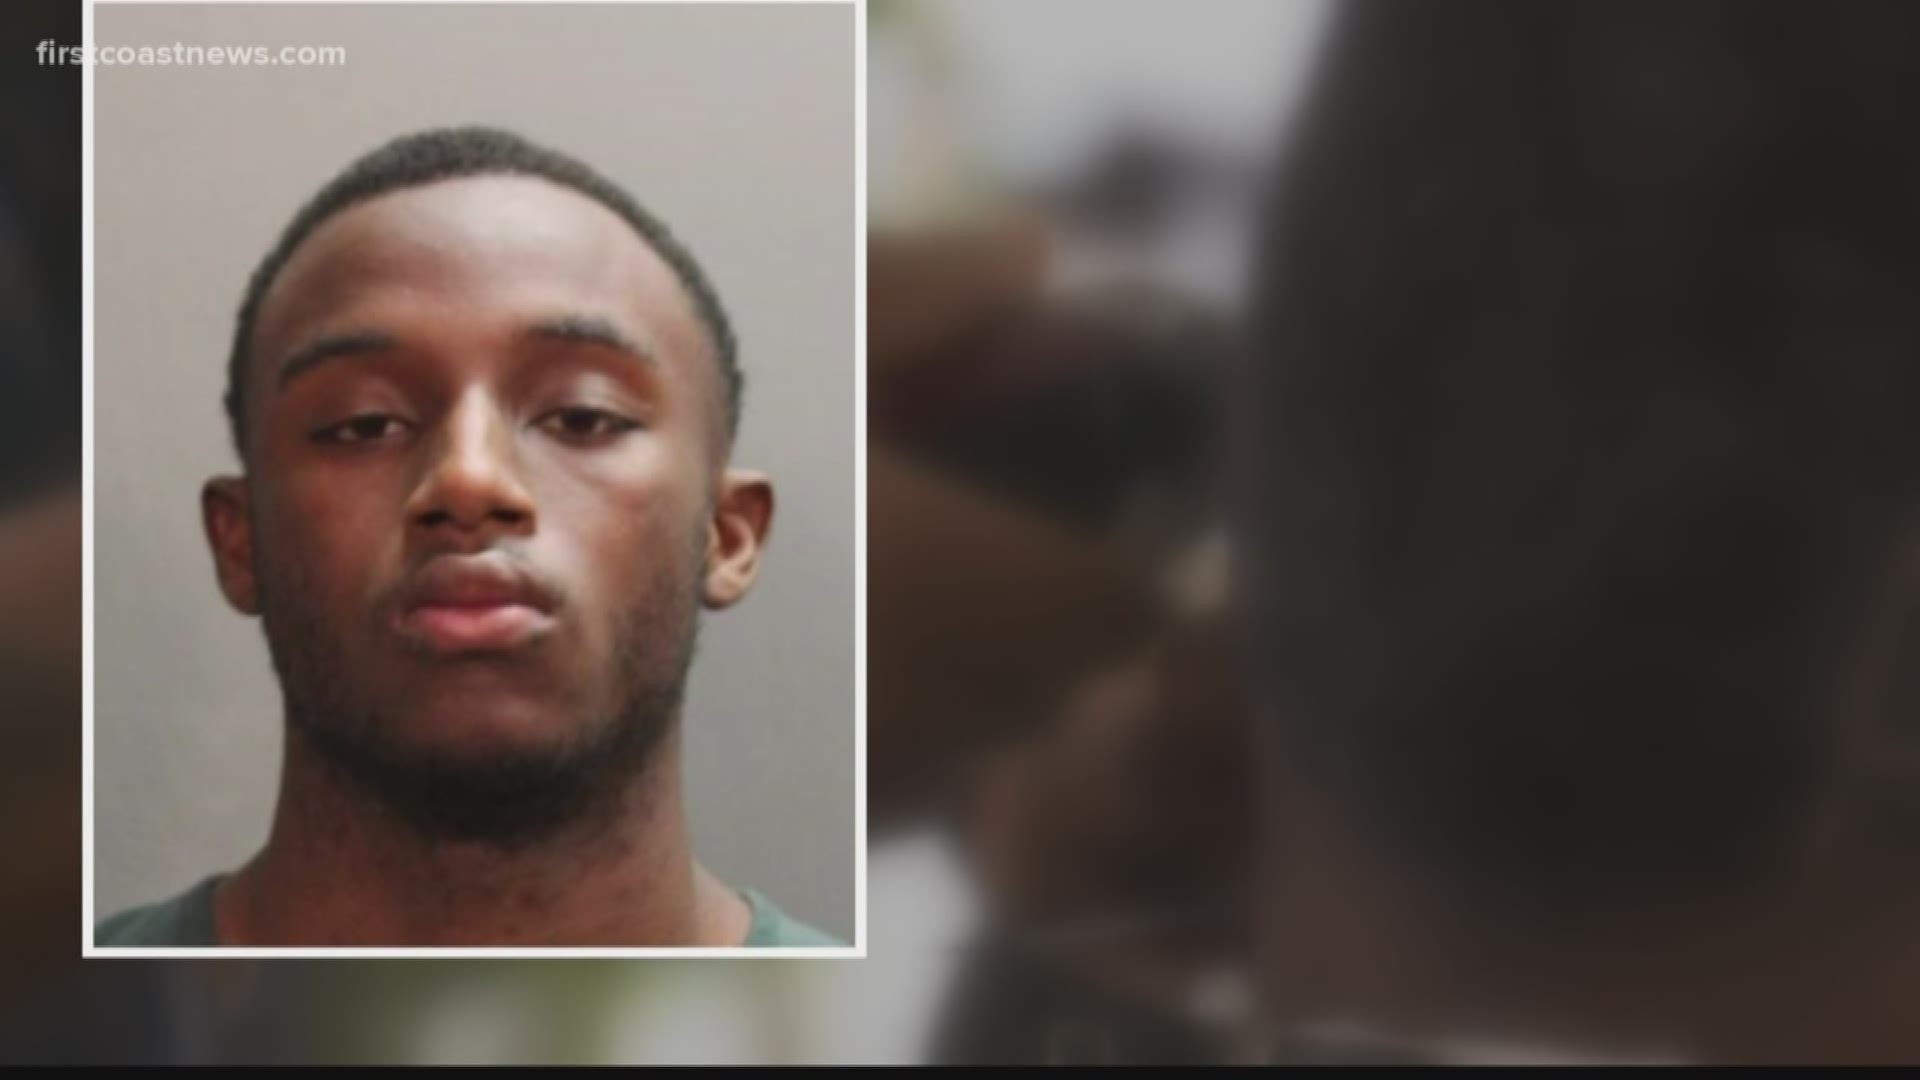 Trevon Wiley reportedly caused the double shooting on Feb. 16 in the 7000 block of Matthew Street, which resulted in two people shot. One of those people, identified as 19-year-old Ziykye Lindsey Ray Barnhill, died at the scene.